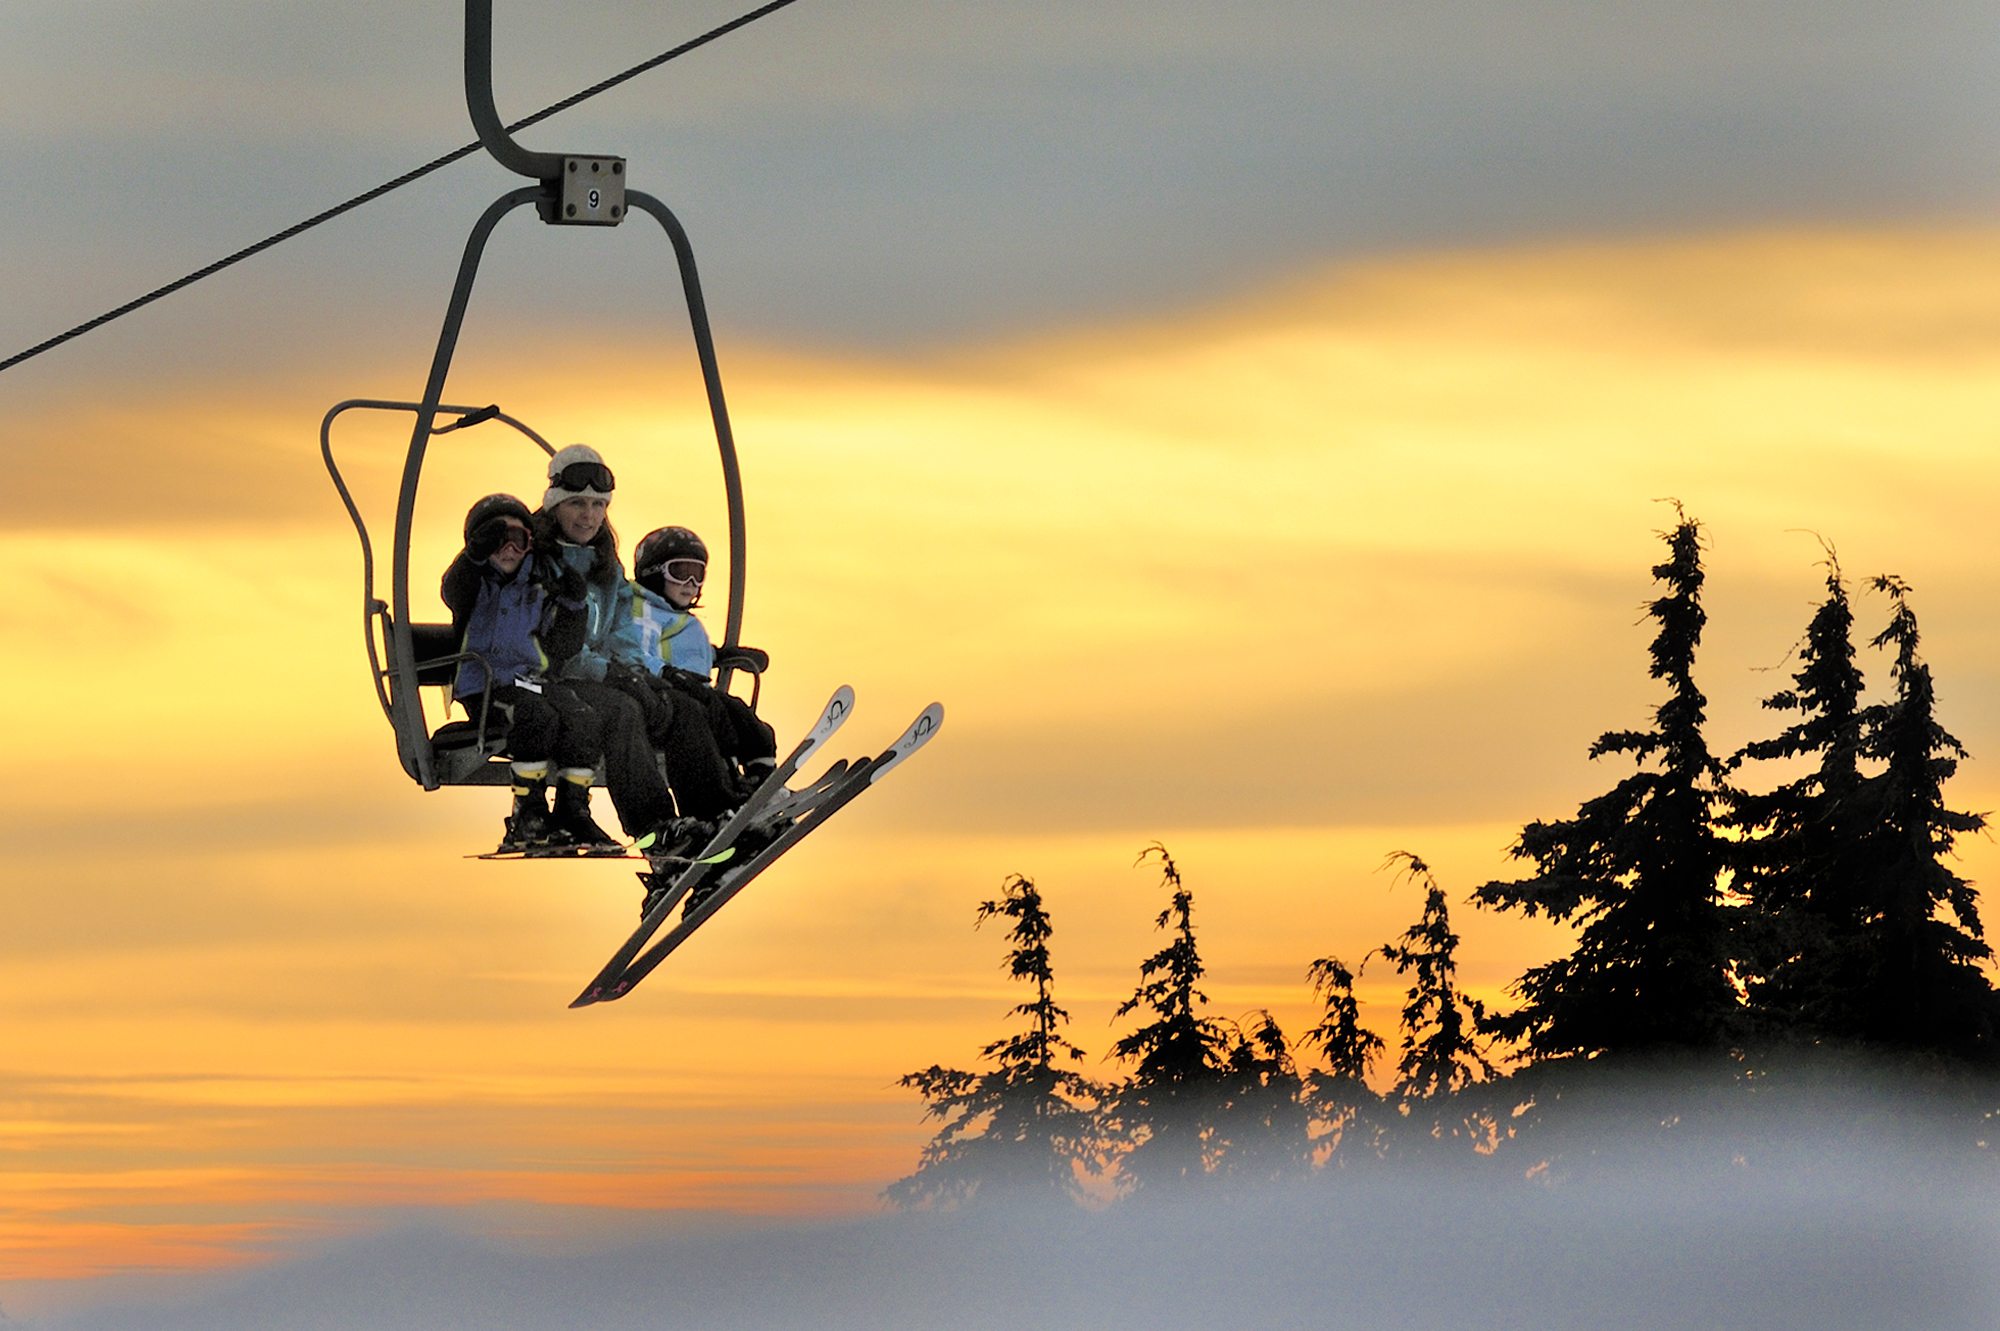 Mount Hood Meadows and Timberline Lodge are open with Mount Hood Skibowl beginning its winter season on Friday.